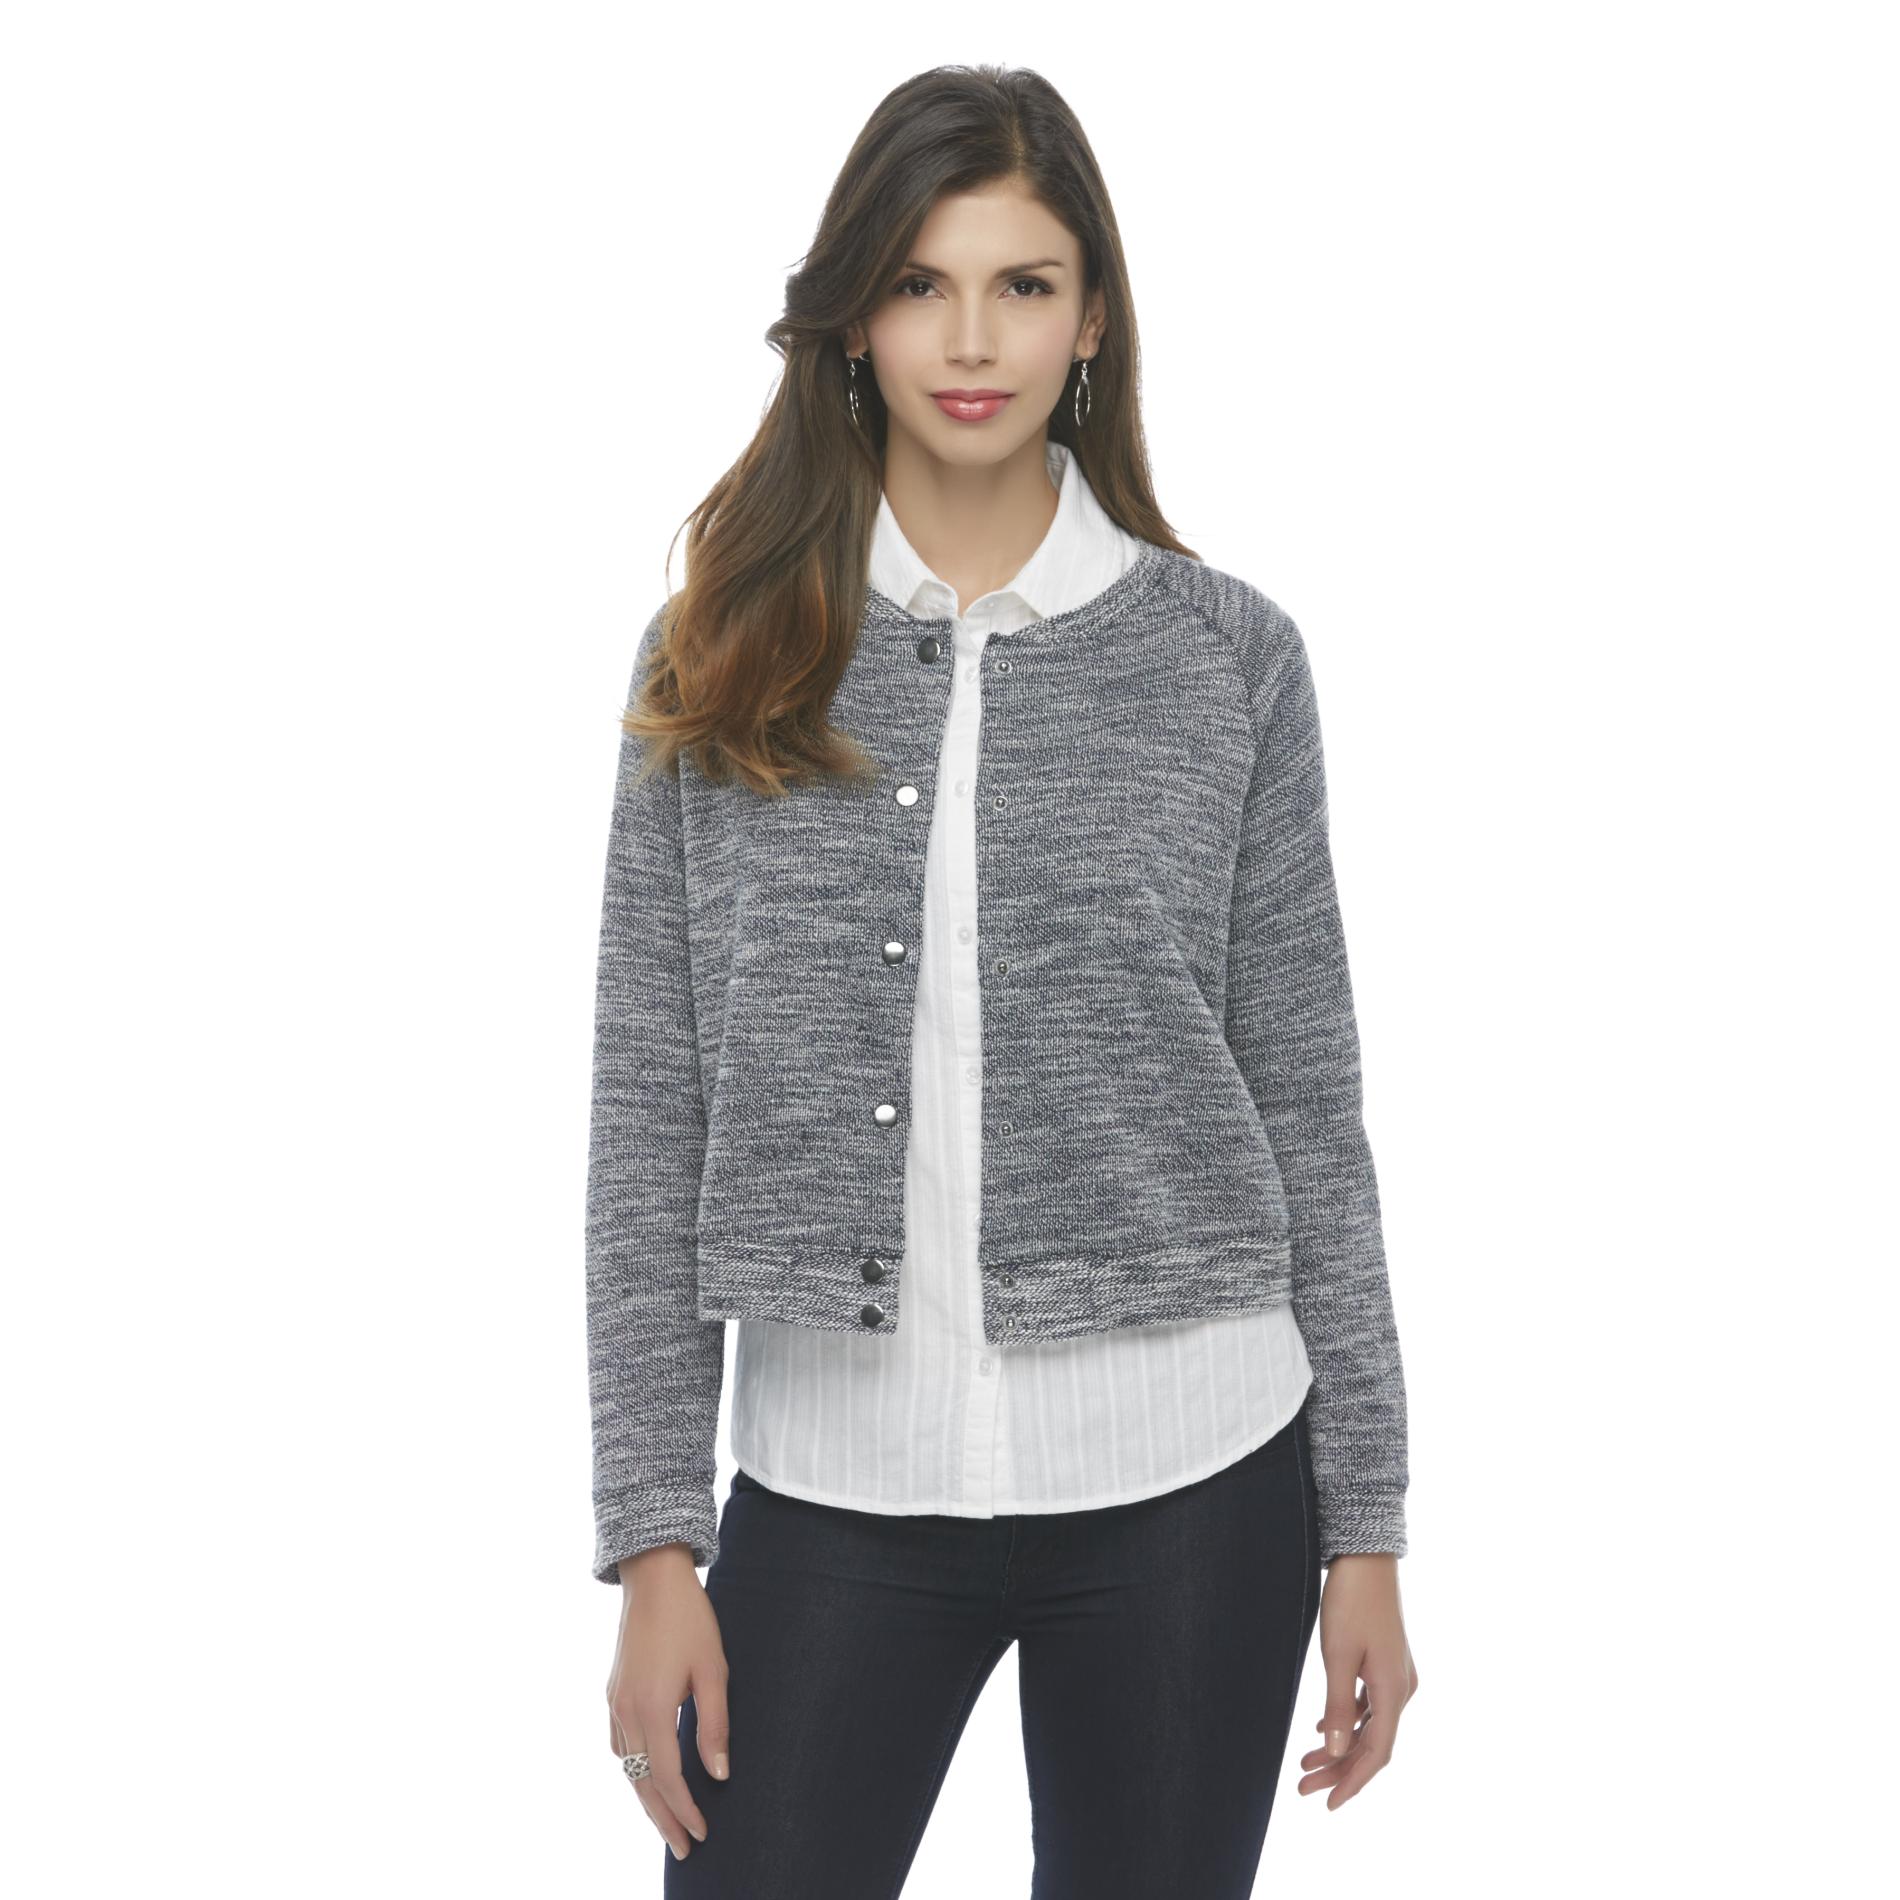 Attention Women's Snap-Front Cardigan - Heathered